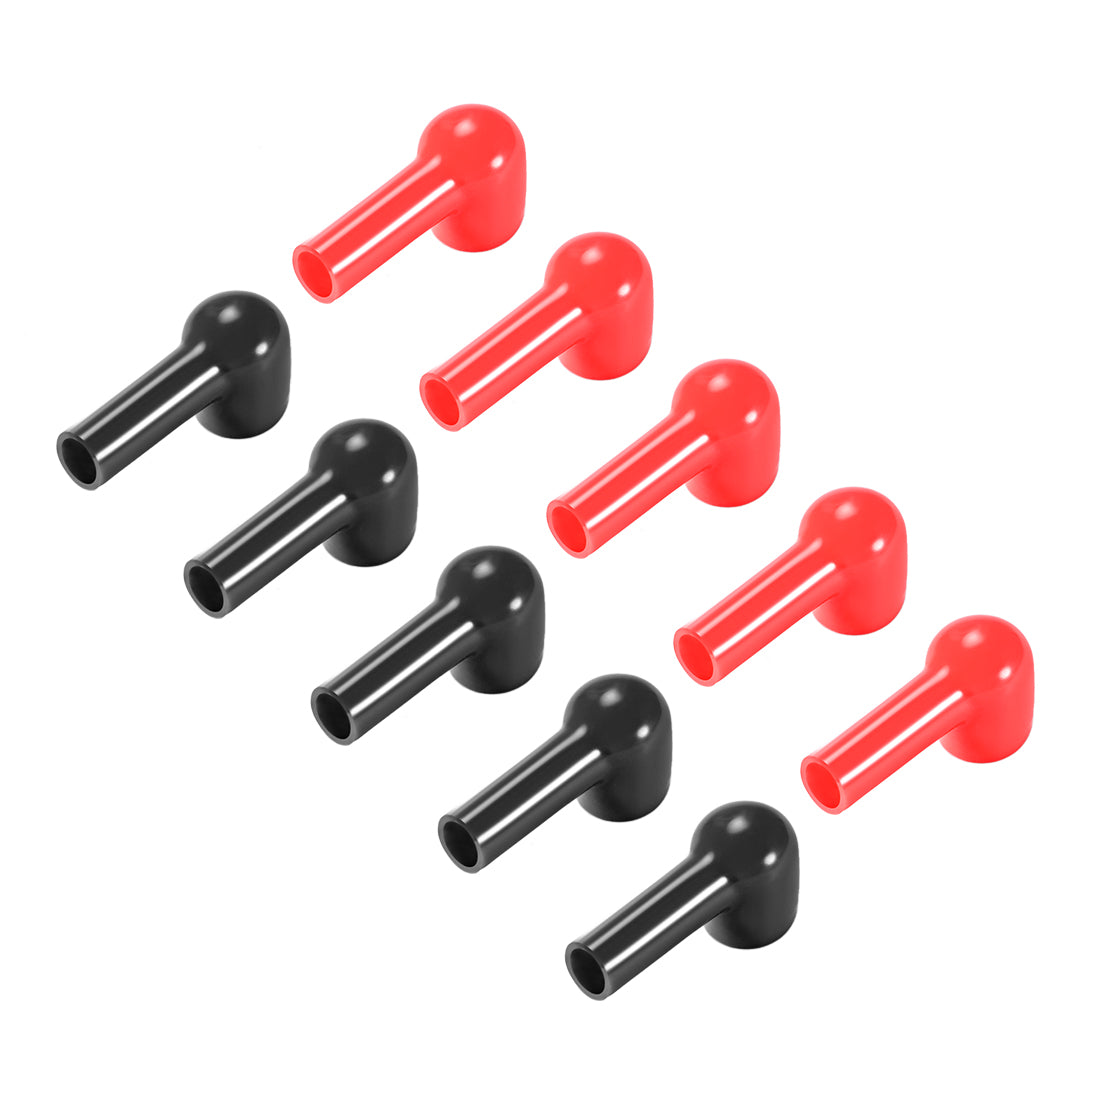 uxcell Uxcell Battery Terminal Insulating Rubber Protector Covers for 16mm Terminal 8mm Cable Red Black 5 Pairs